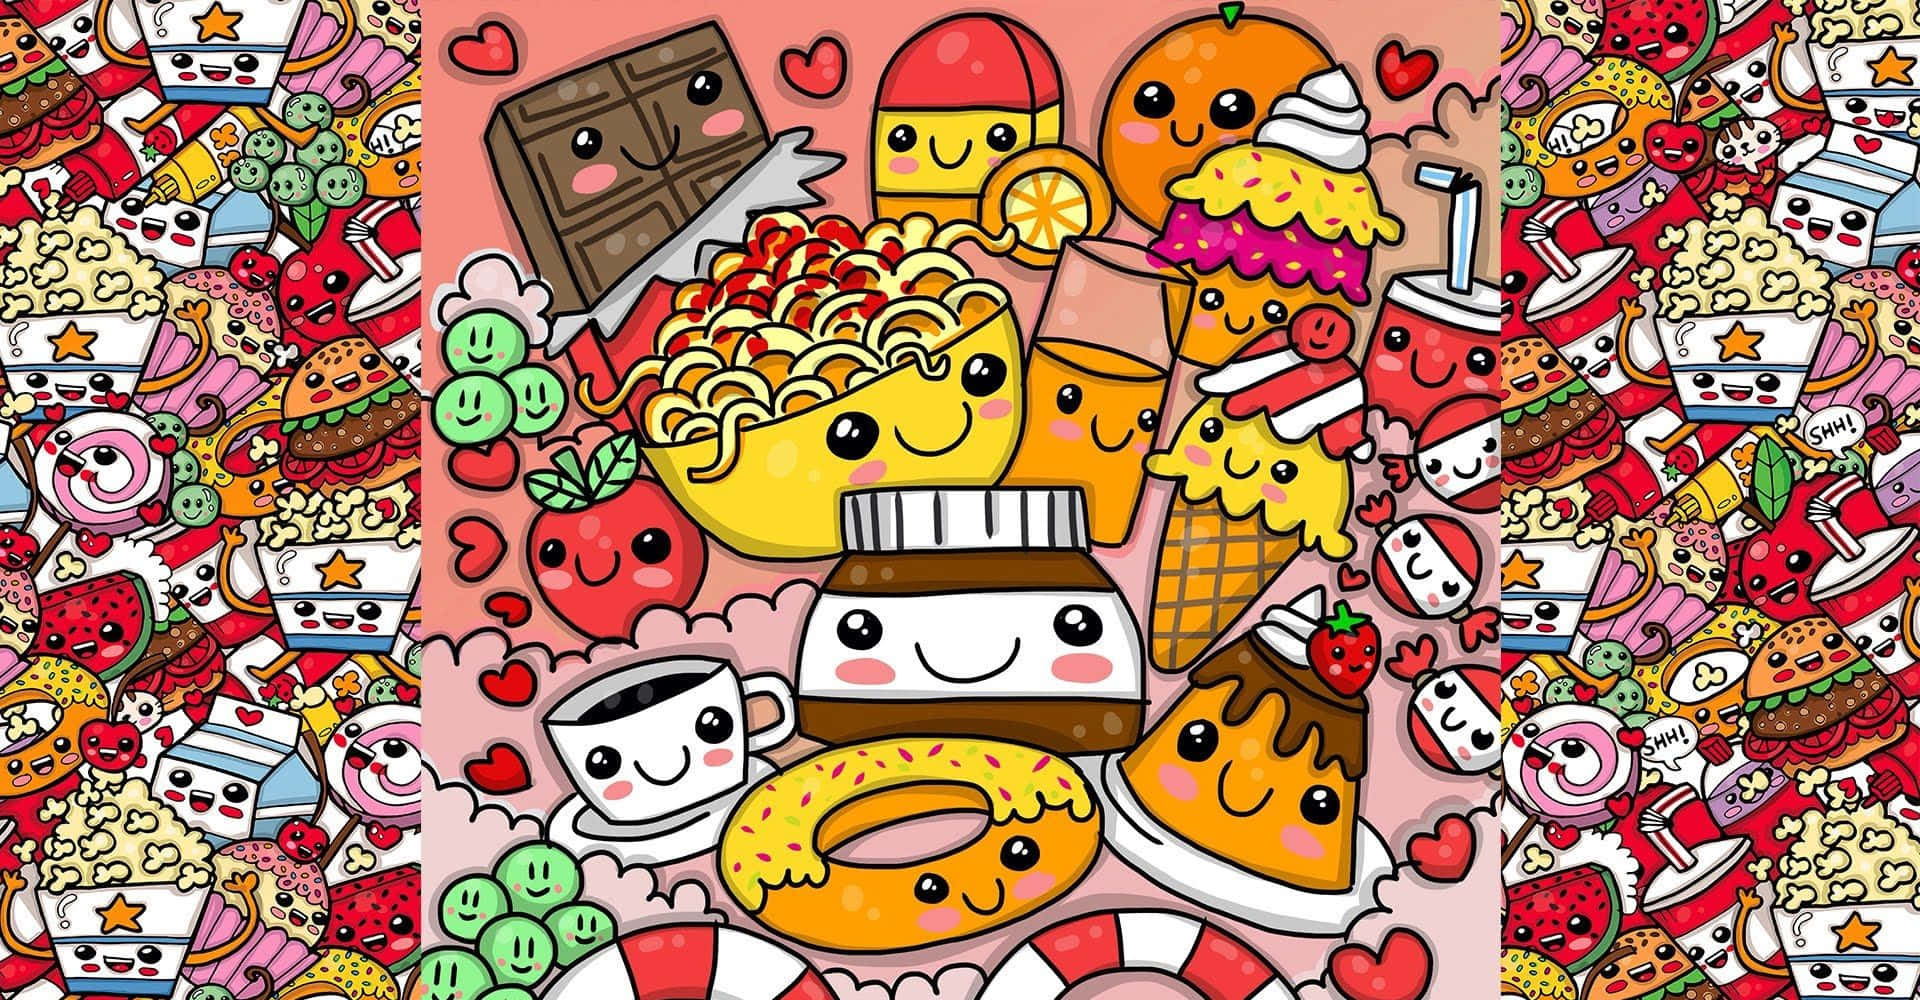 Cute Food Explosion: A Colorful and Tasty Wonderland